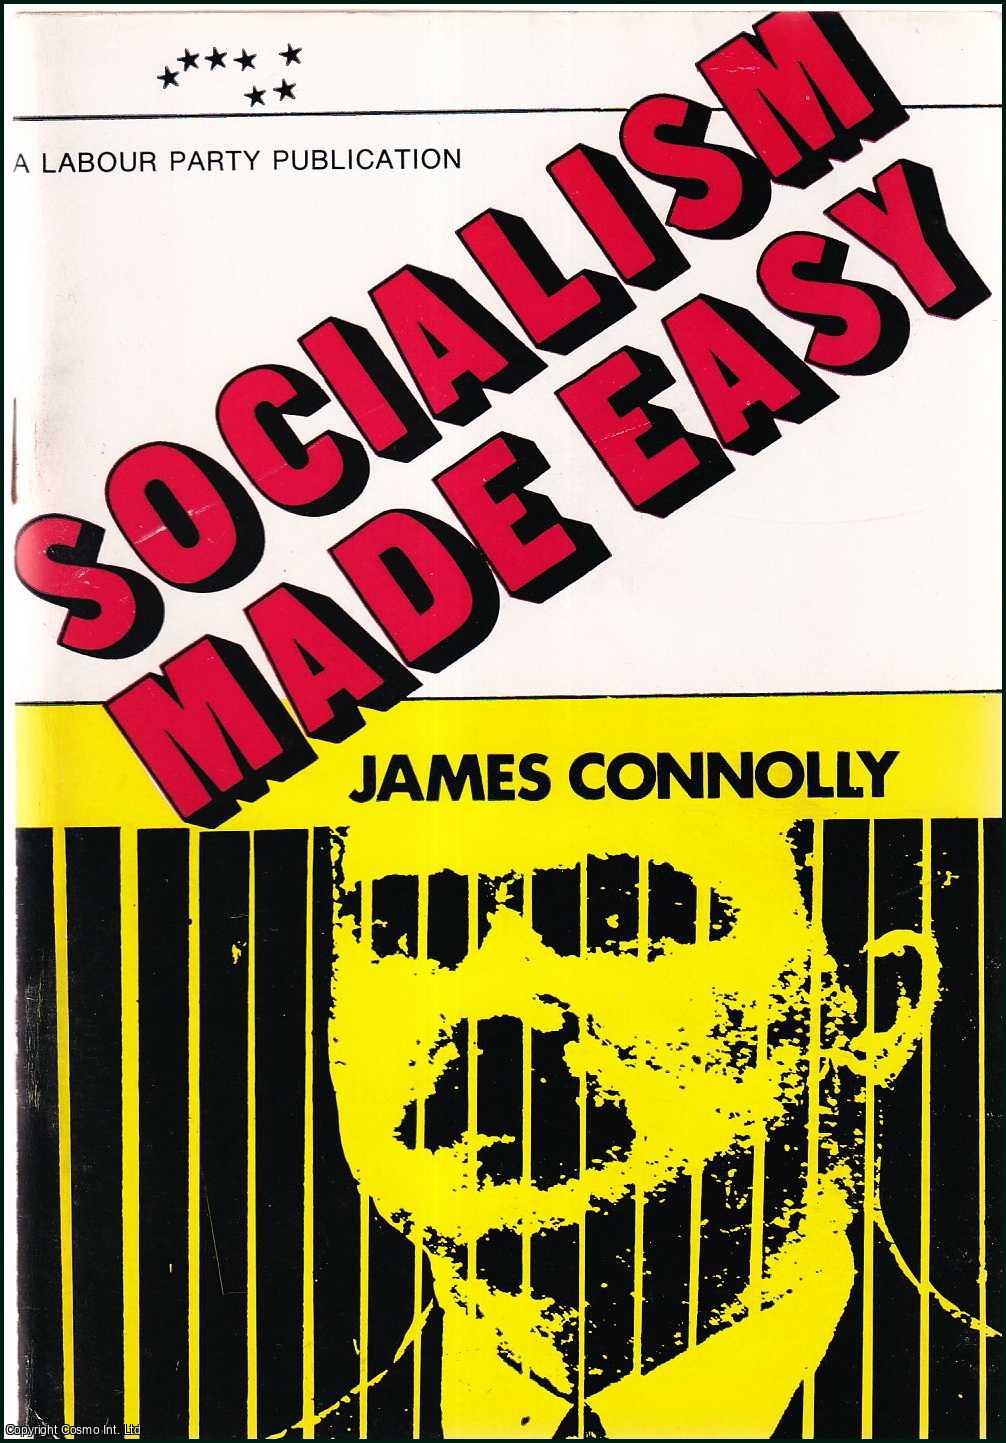 James Connolly - Socialism Made Easy.